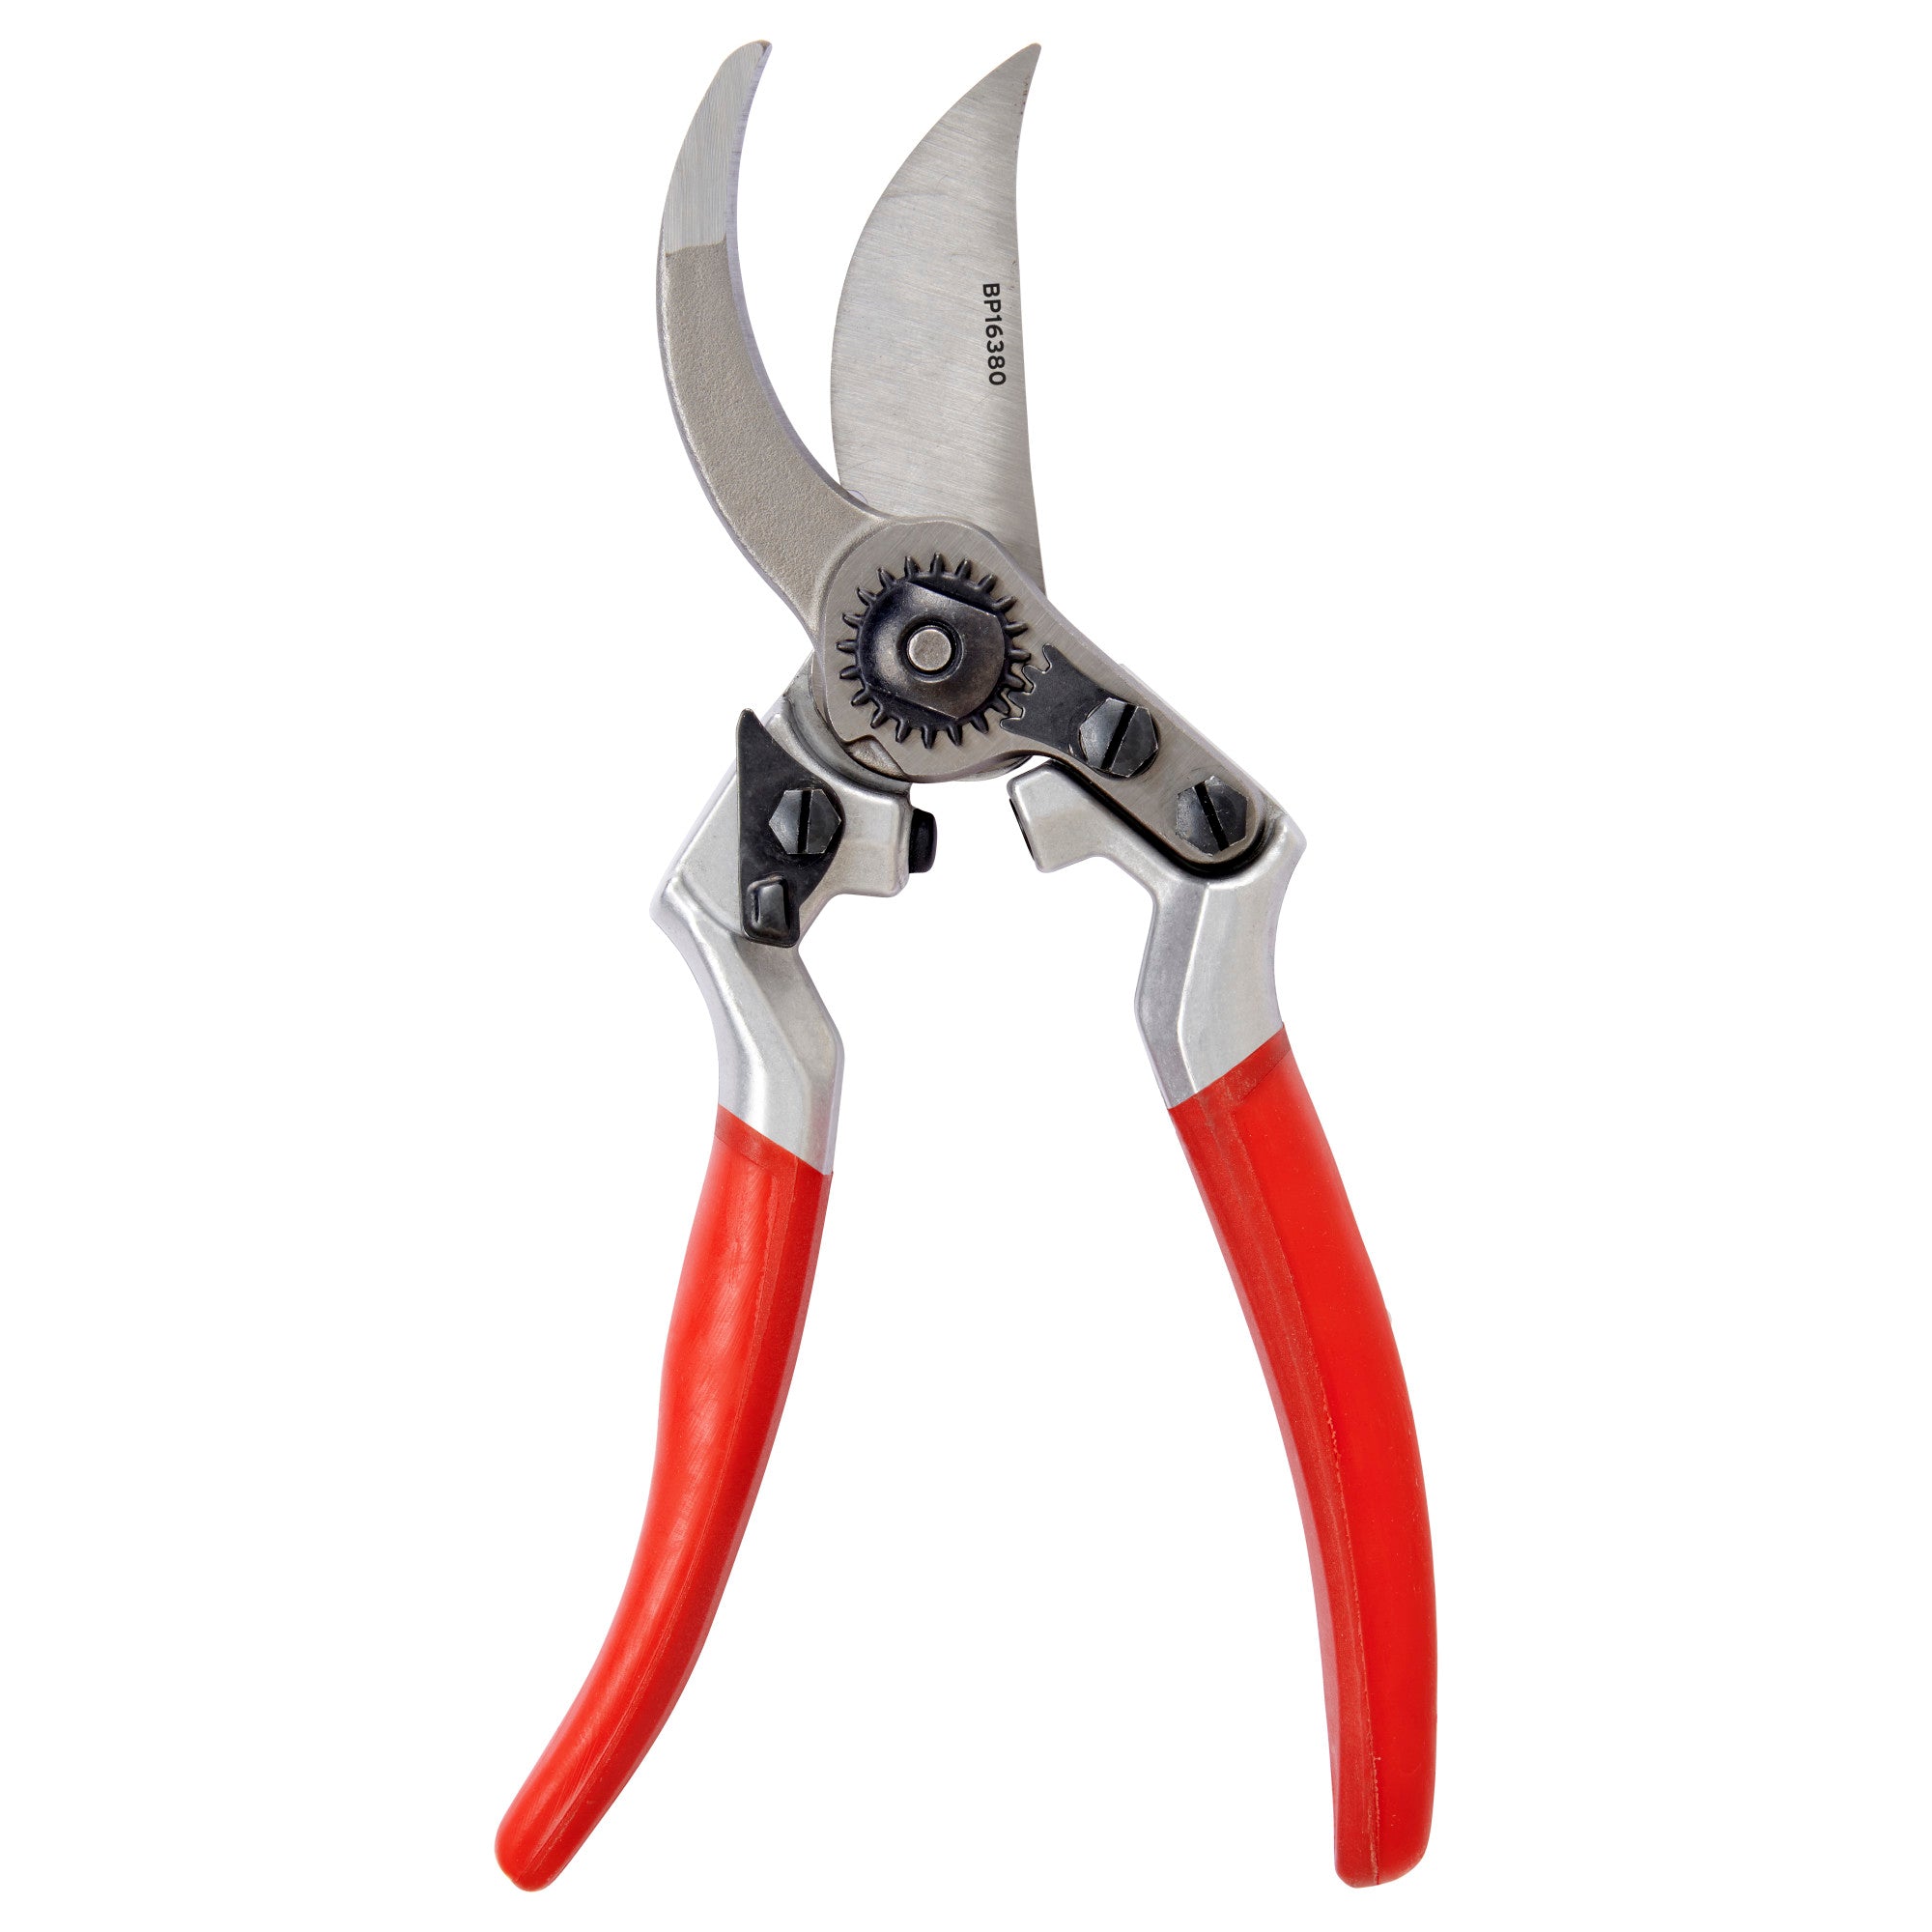 XSeries Pro Bypass Pruner, 1 in. Cut Capacity